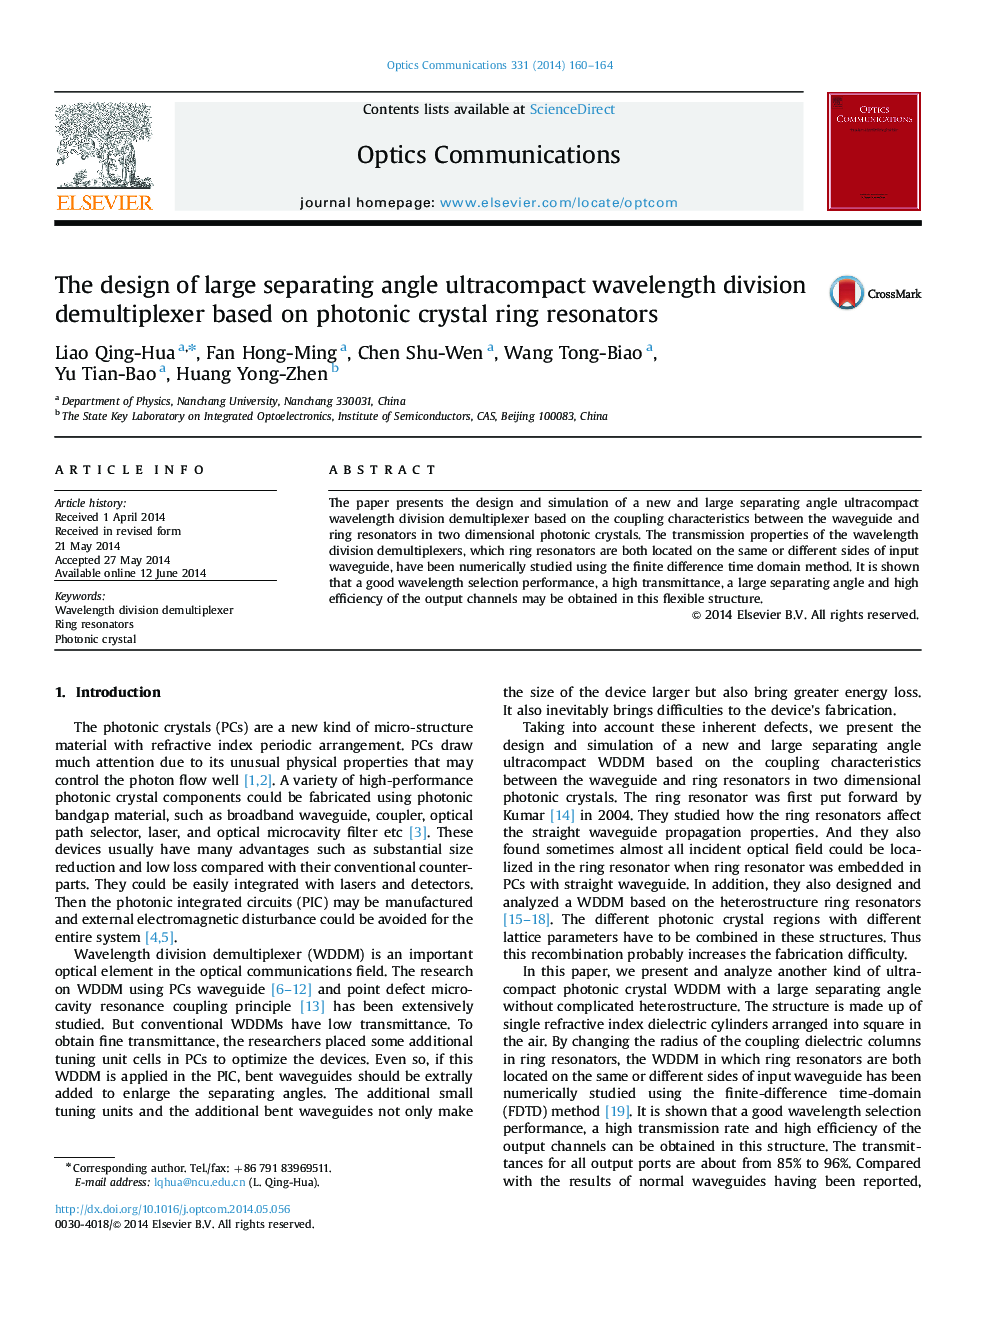 The design of large separating angle ultracompact wavelength division demultiplexer based on photonic crystal ring resonators